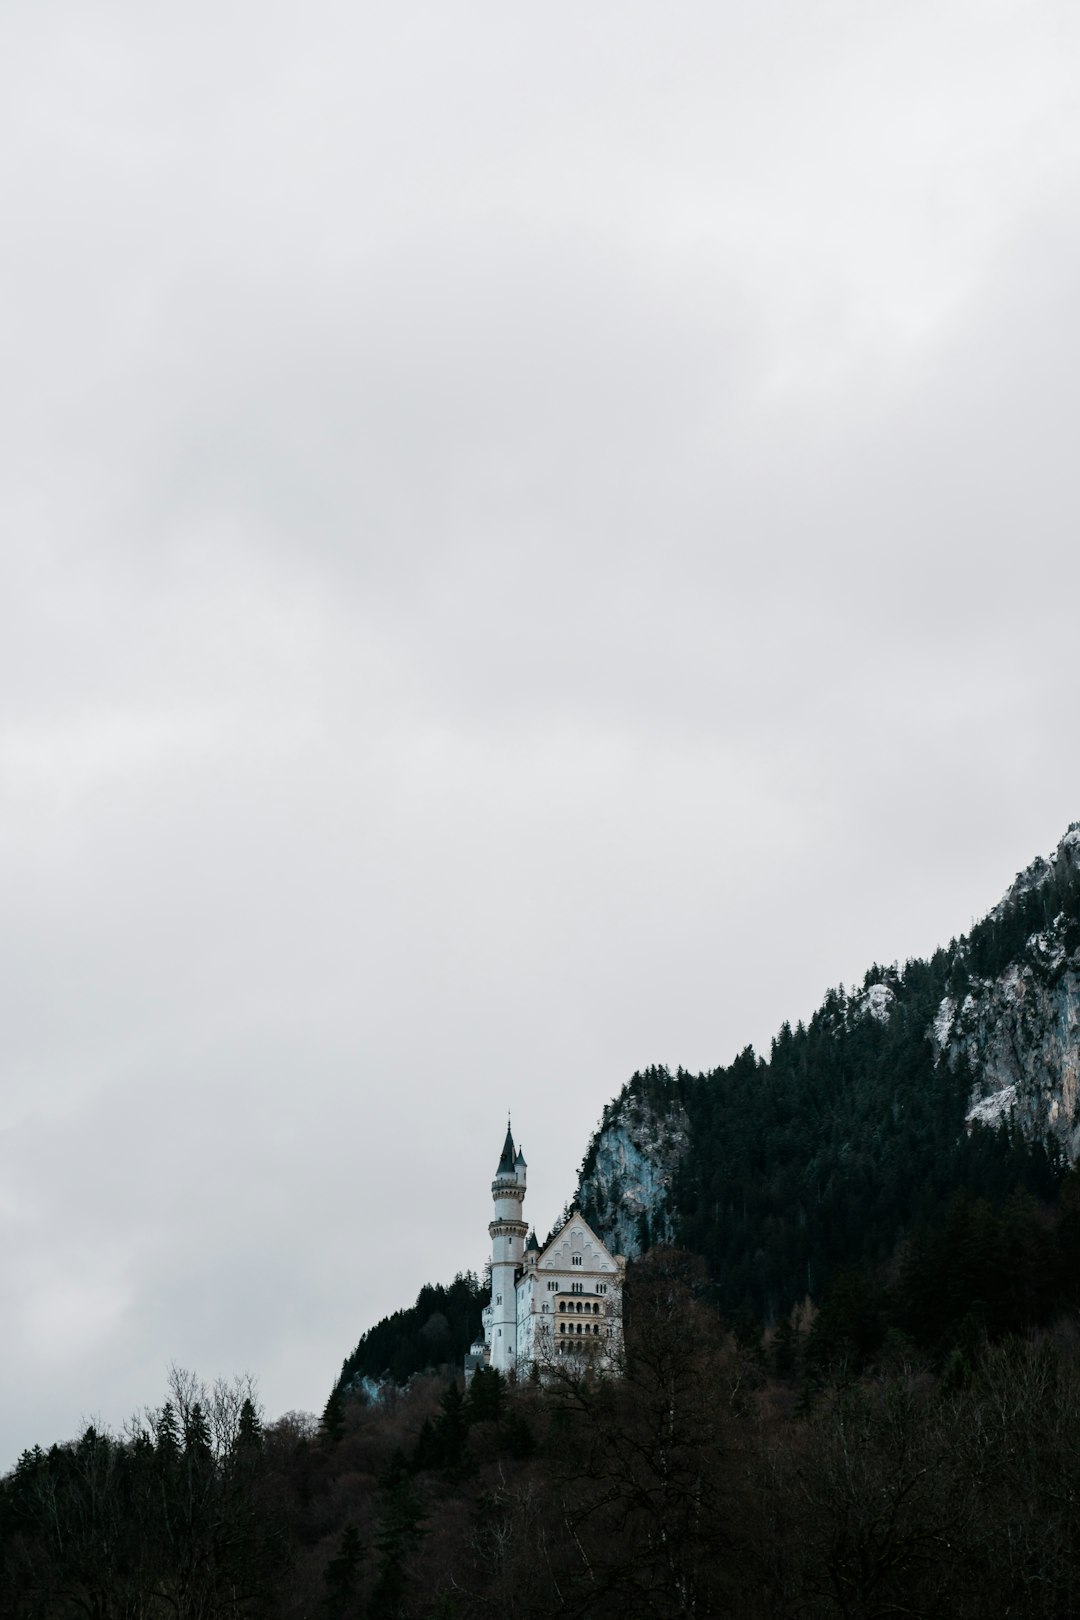 travelers stories about Hill in Neuschwanstein Castles, Germany